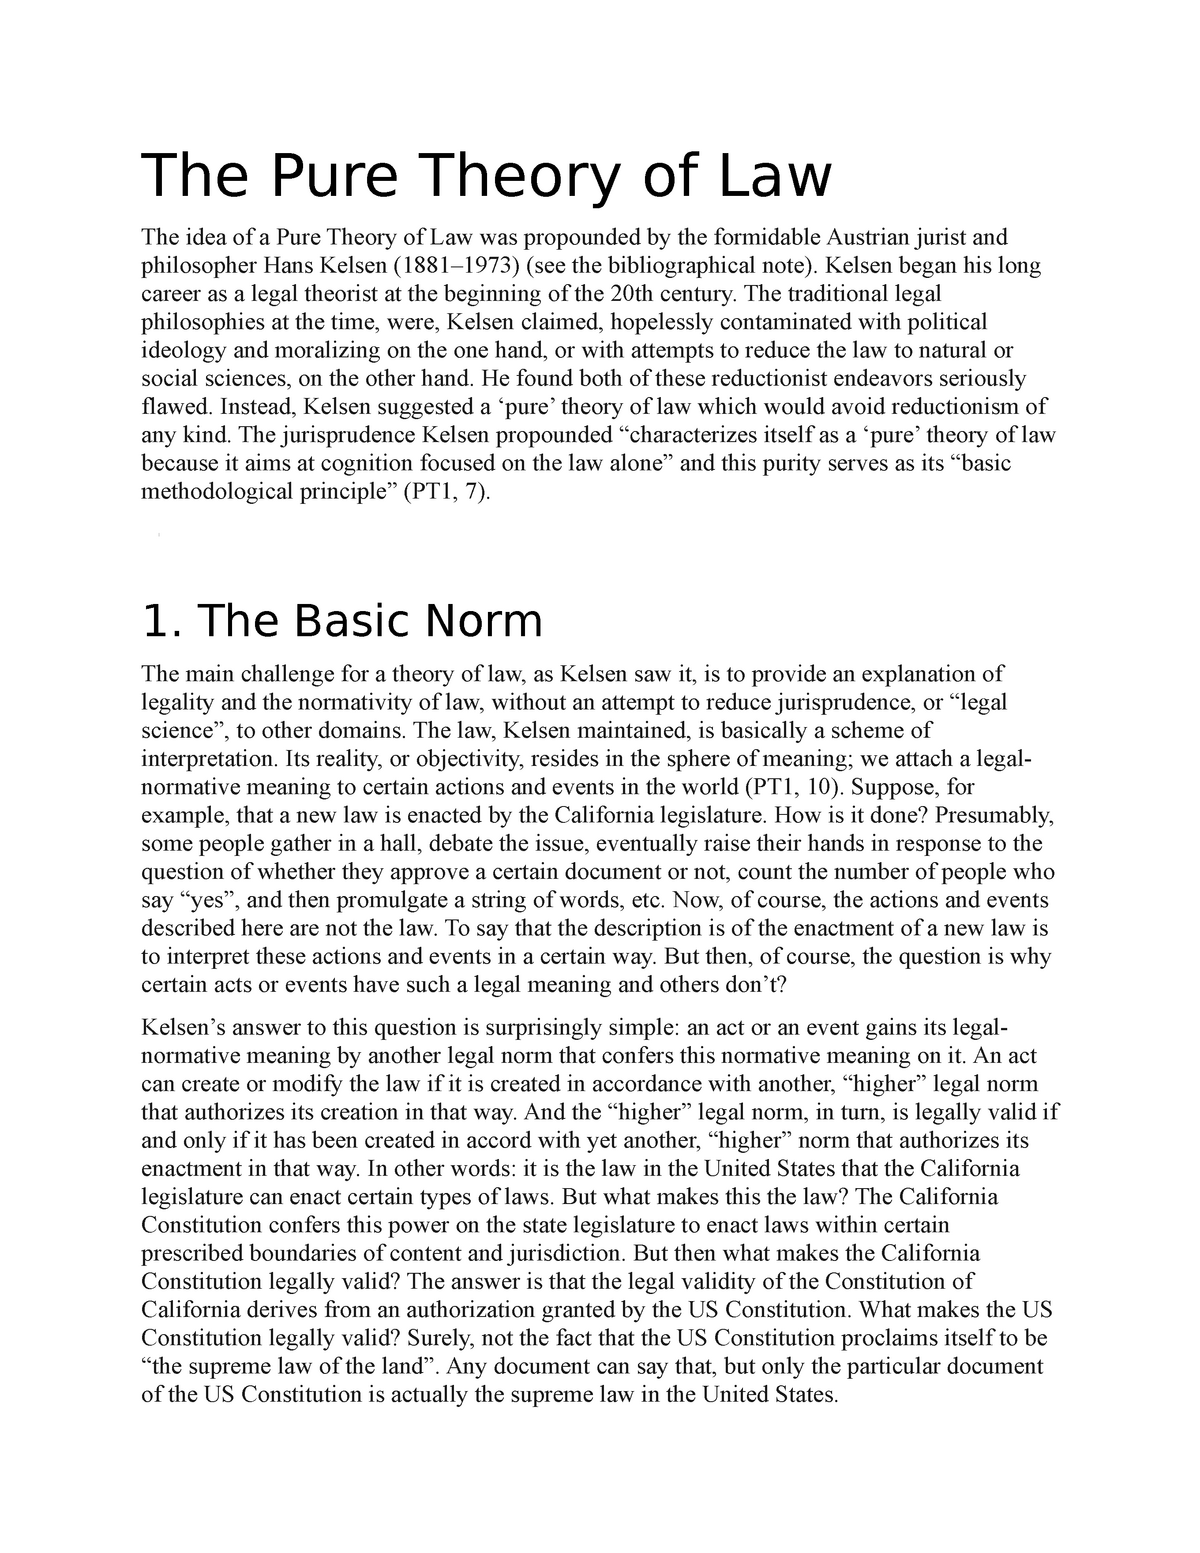 essay on kelsen pure theory of law